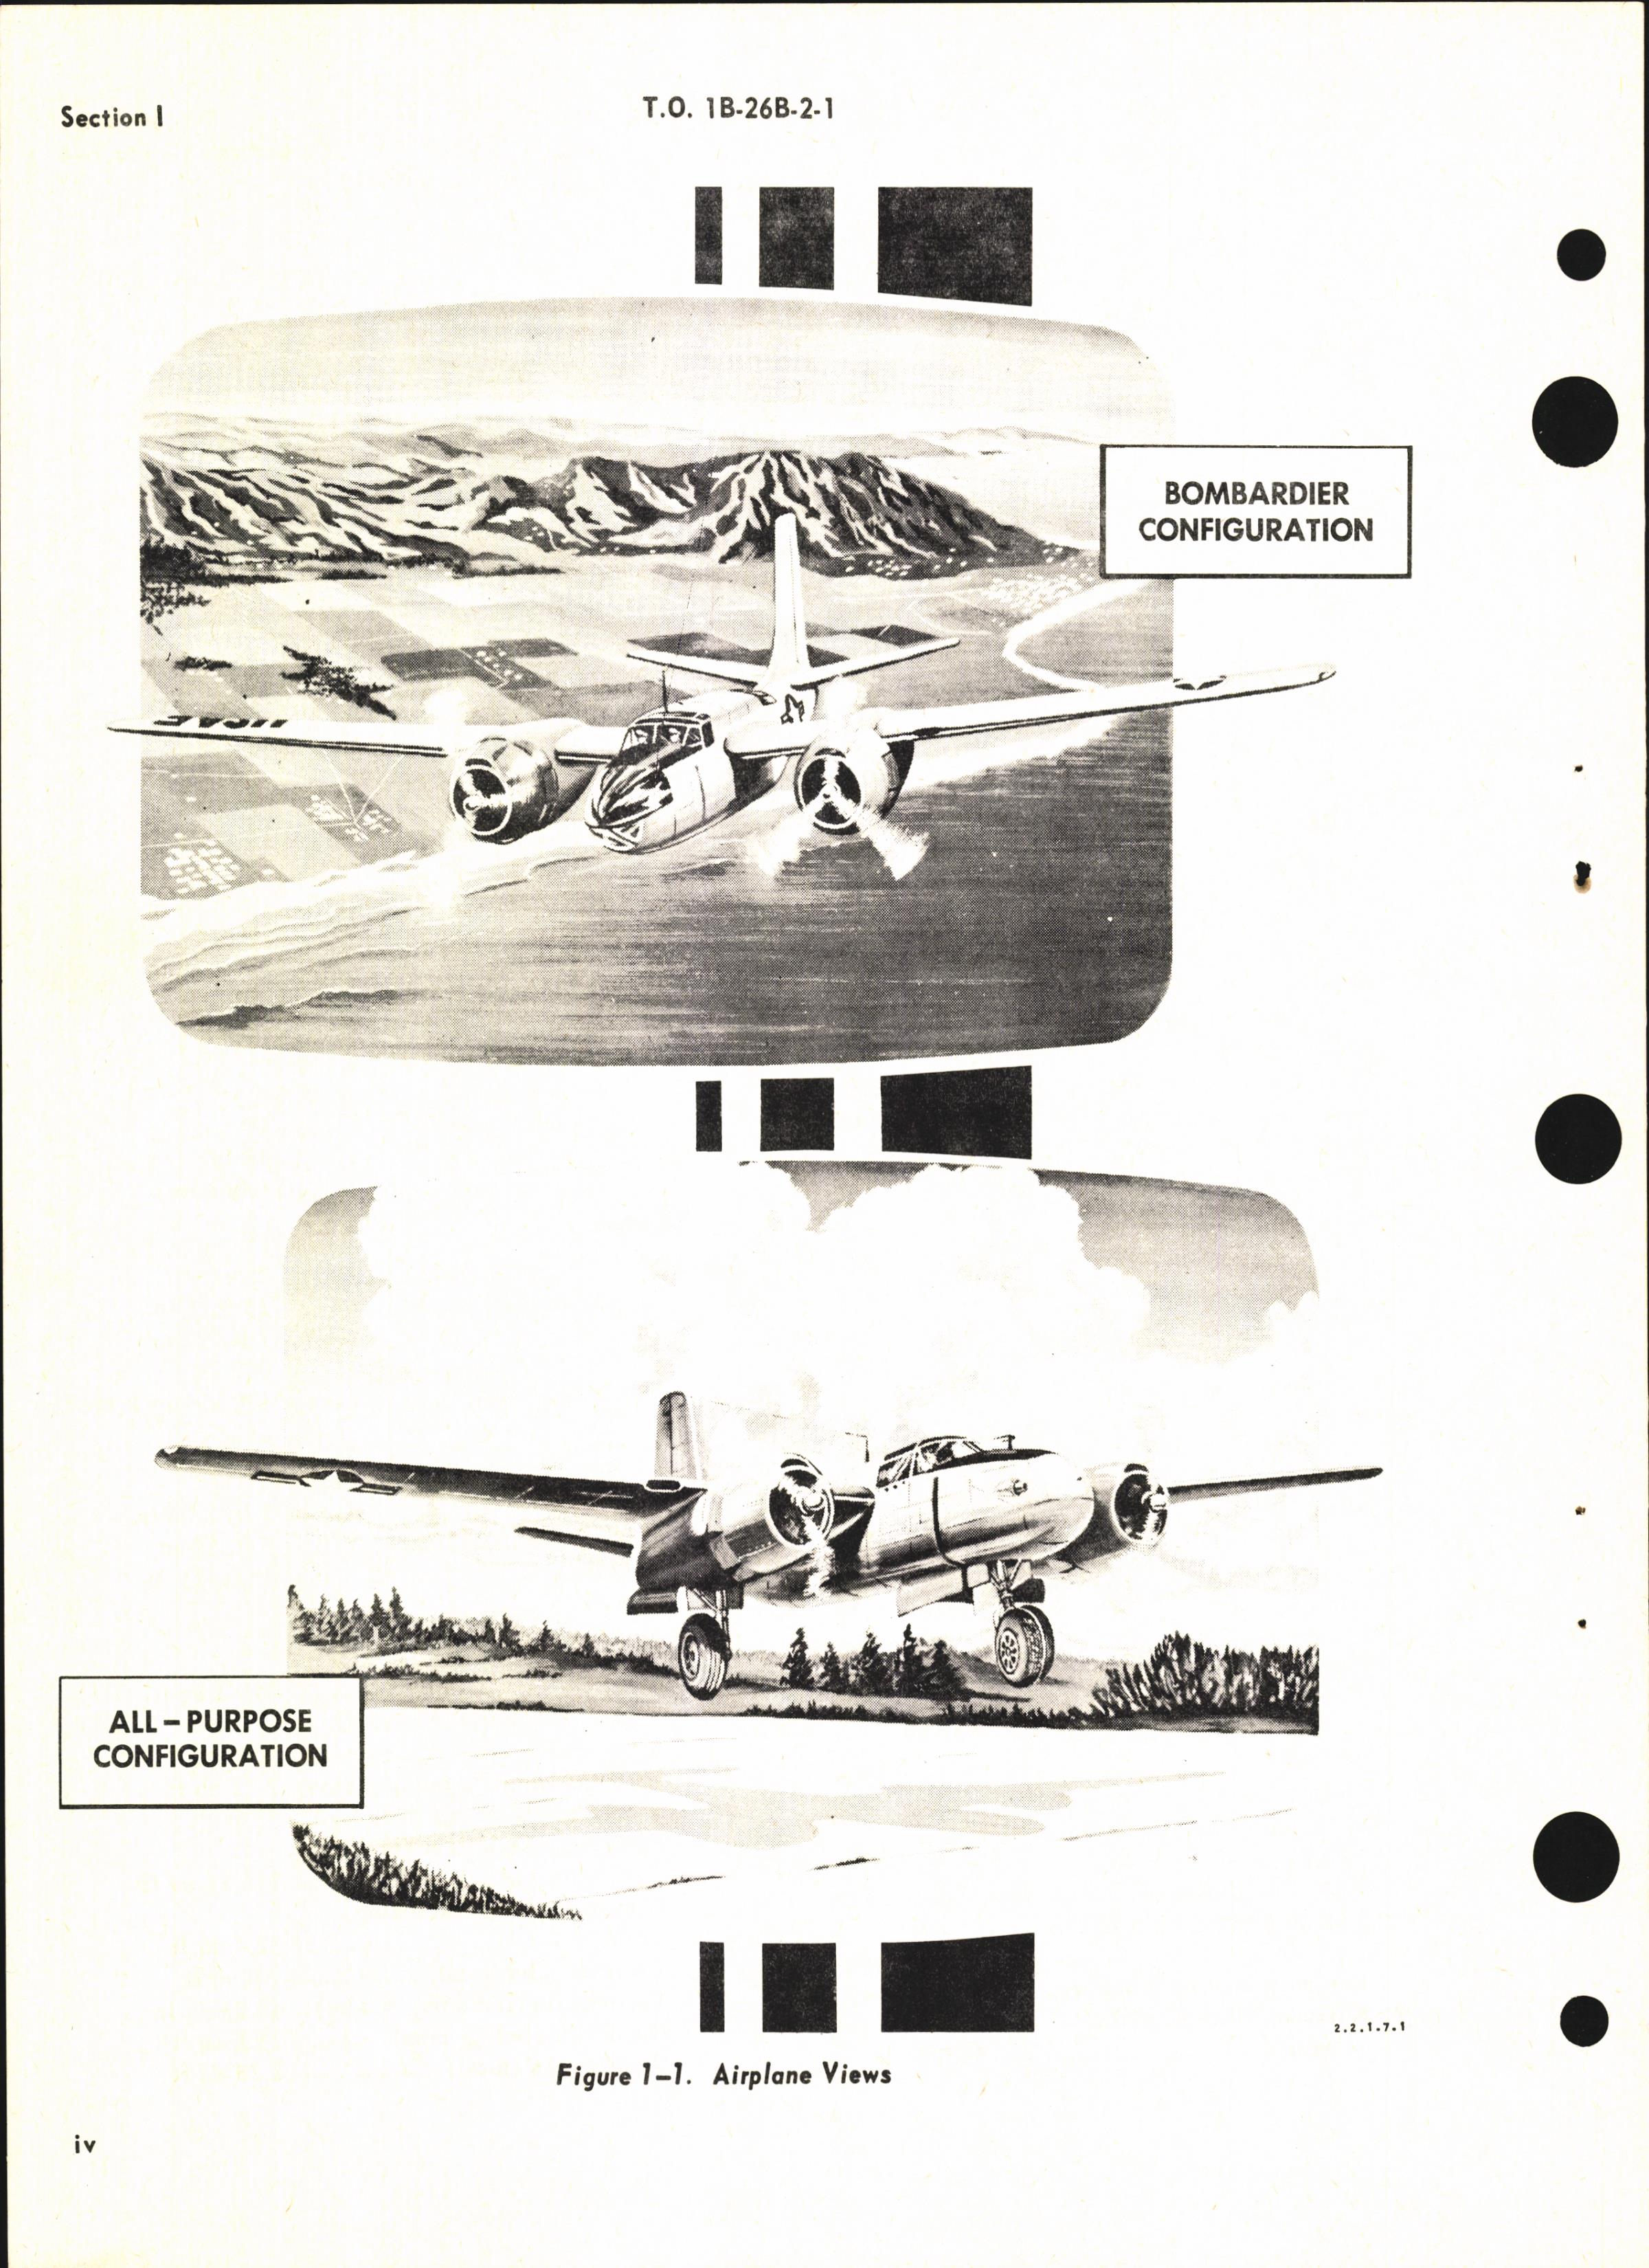 Sample page 6 from AirCorps Library document: Maintenance Instructions for B-26B, B-26C, TB-26B, TB-26C, and JD-1 - General Airplane